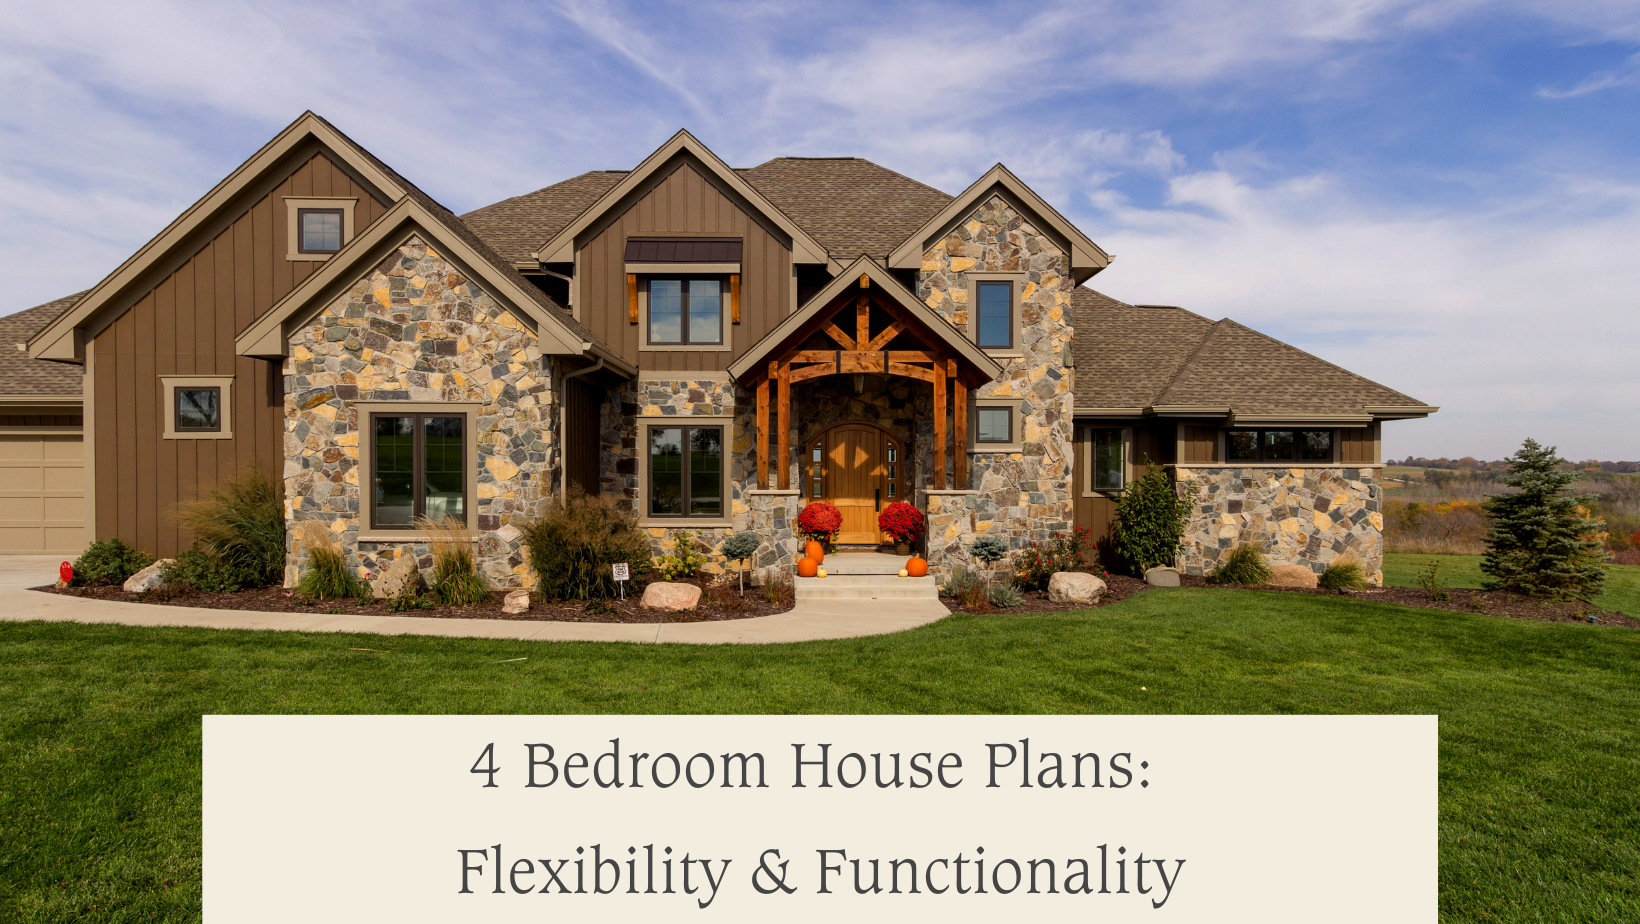 4 Bedroom House Plans: Flexibility and Functionality